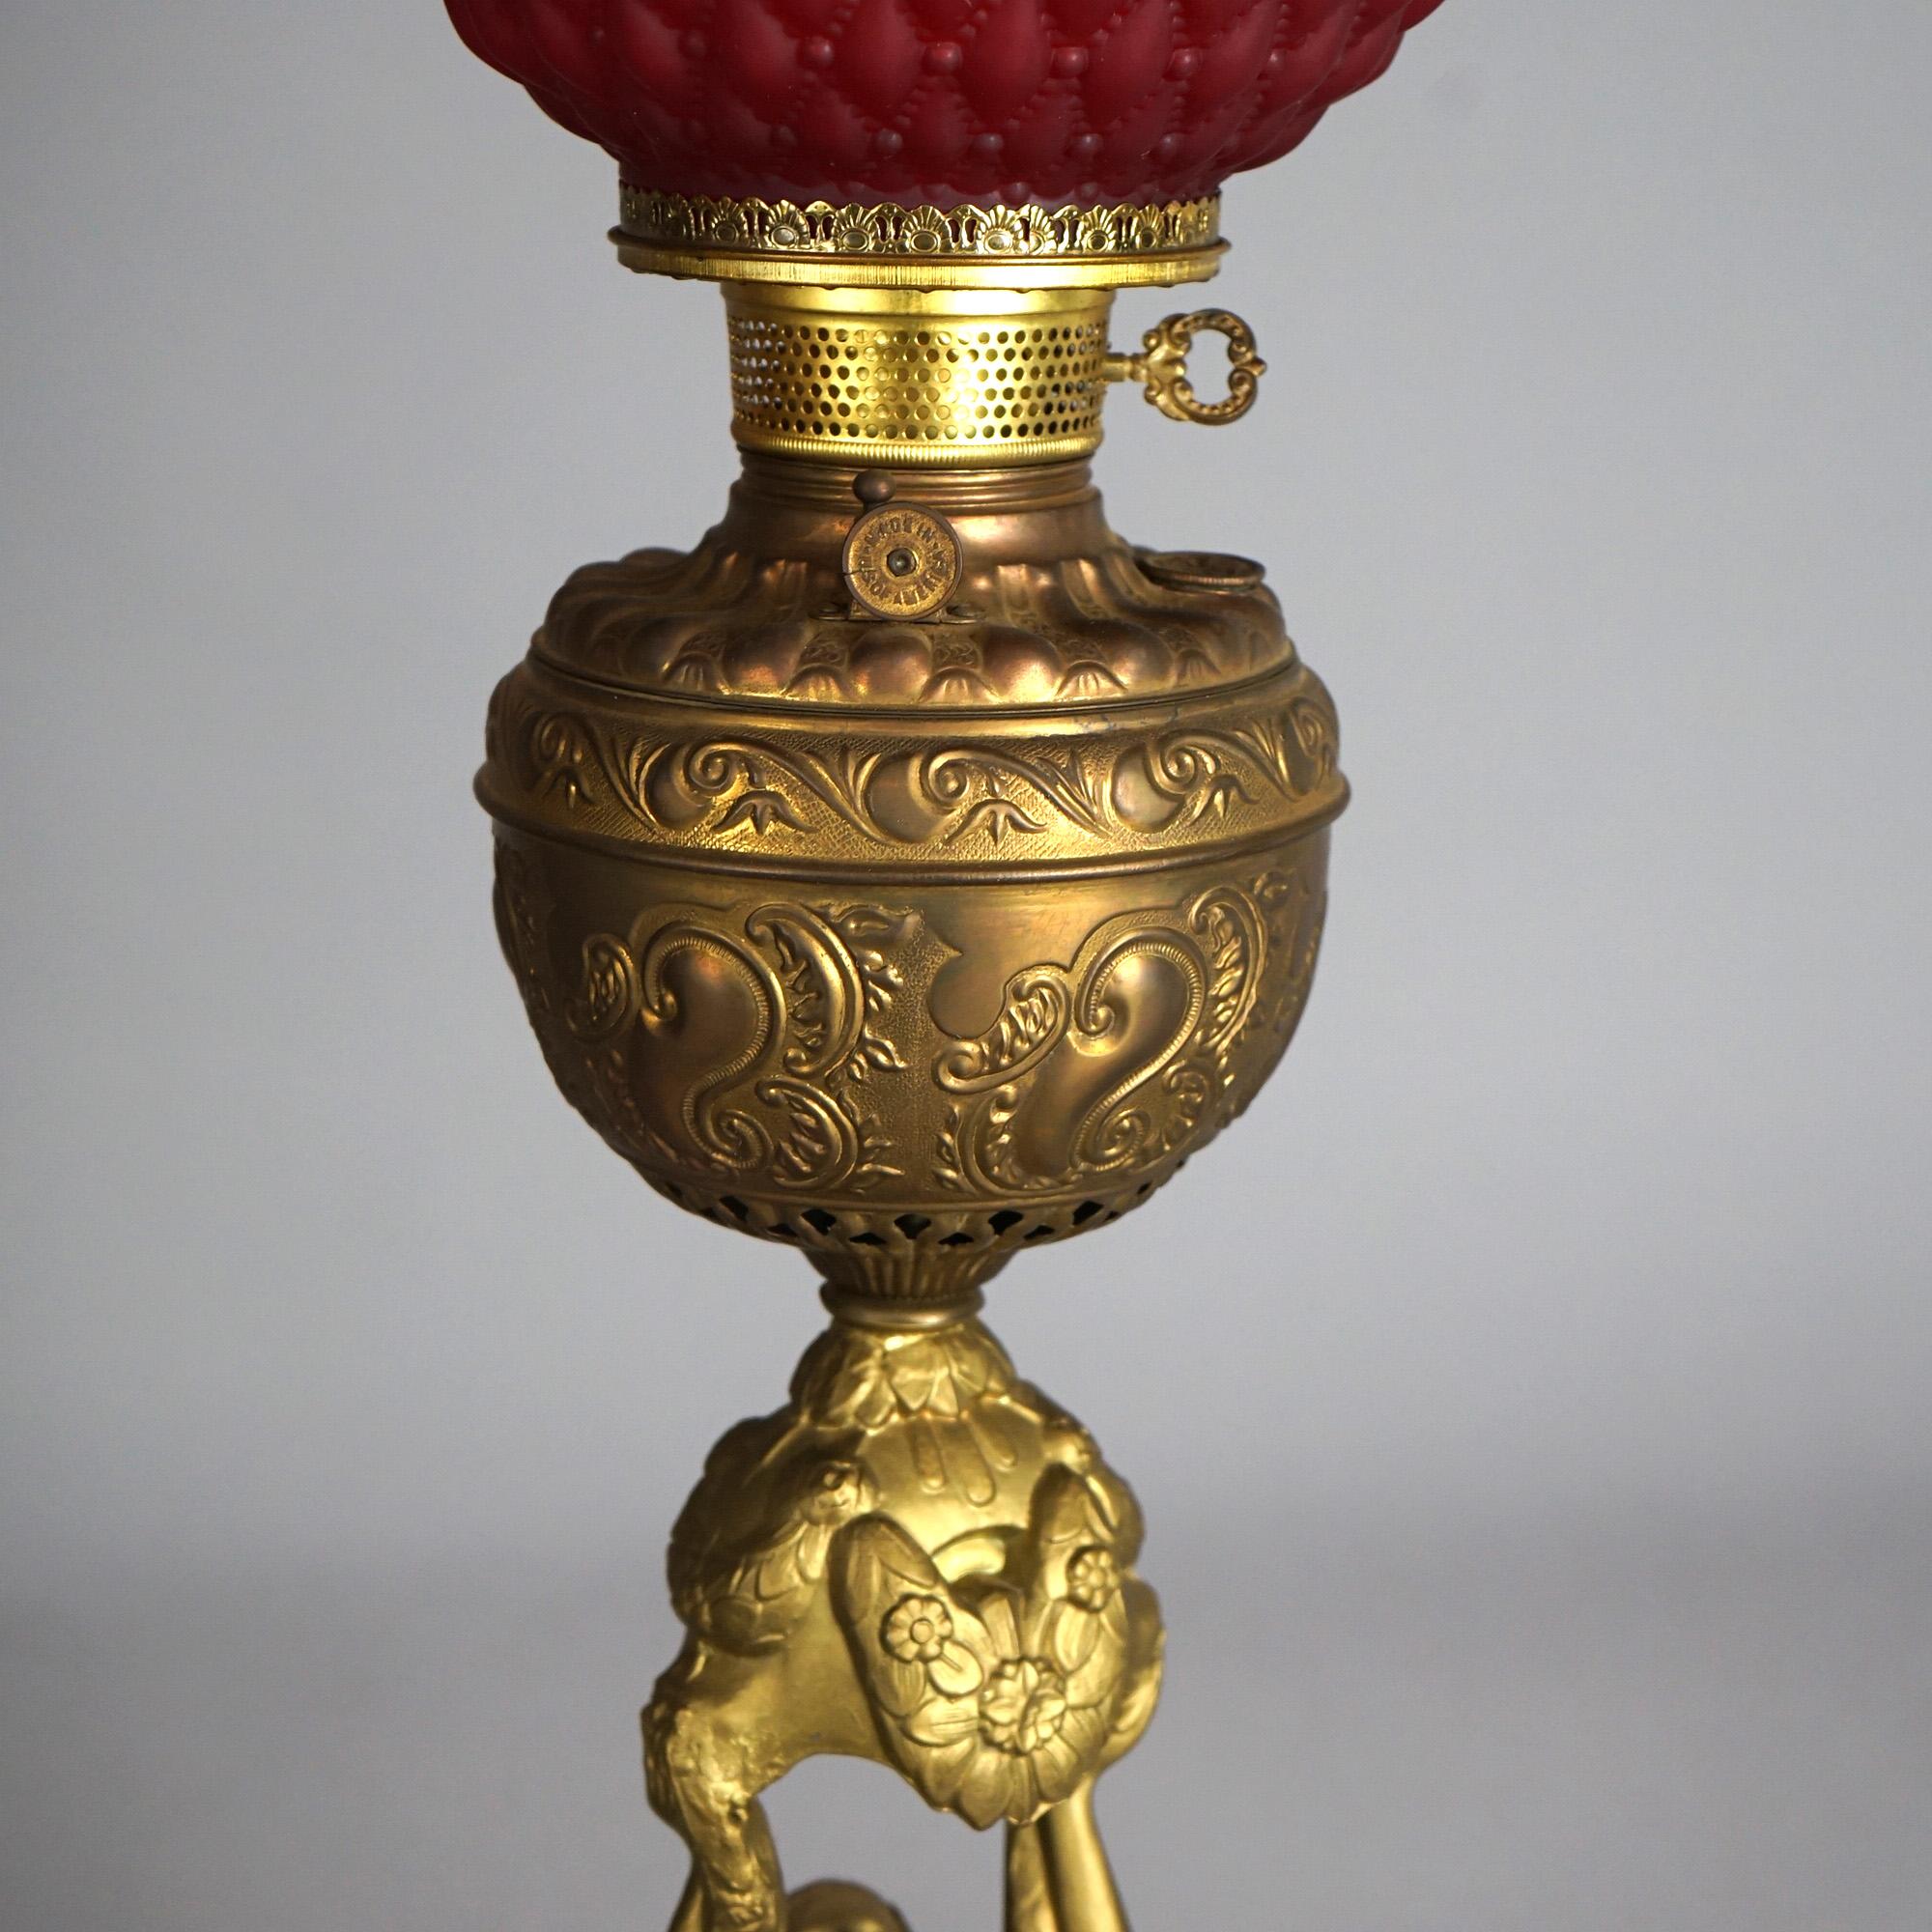 Antique Figural Gilt Metal Parlor Lamp with Quilted Red Glass Shade Circa 1900 For Sale 2